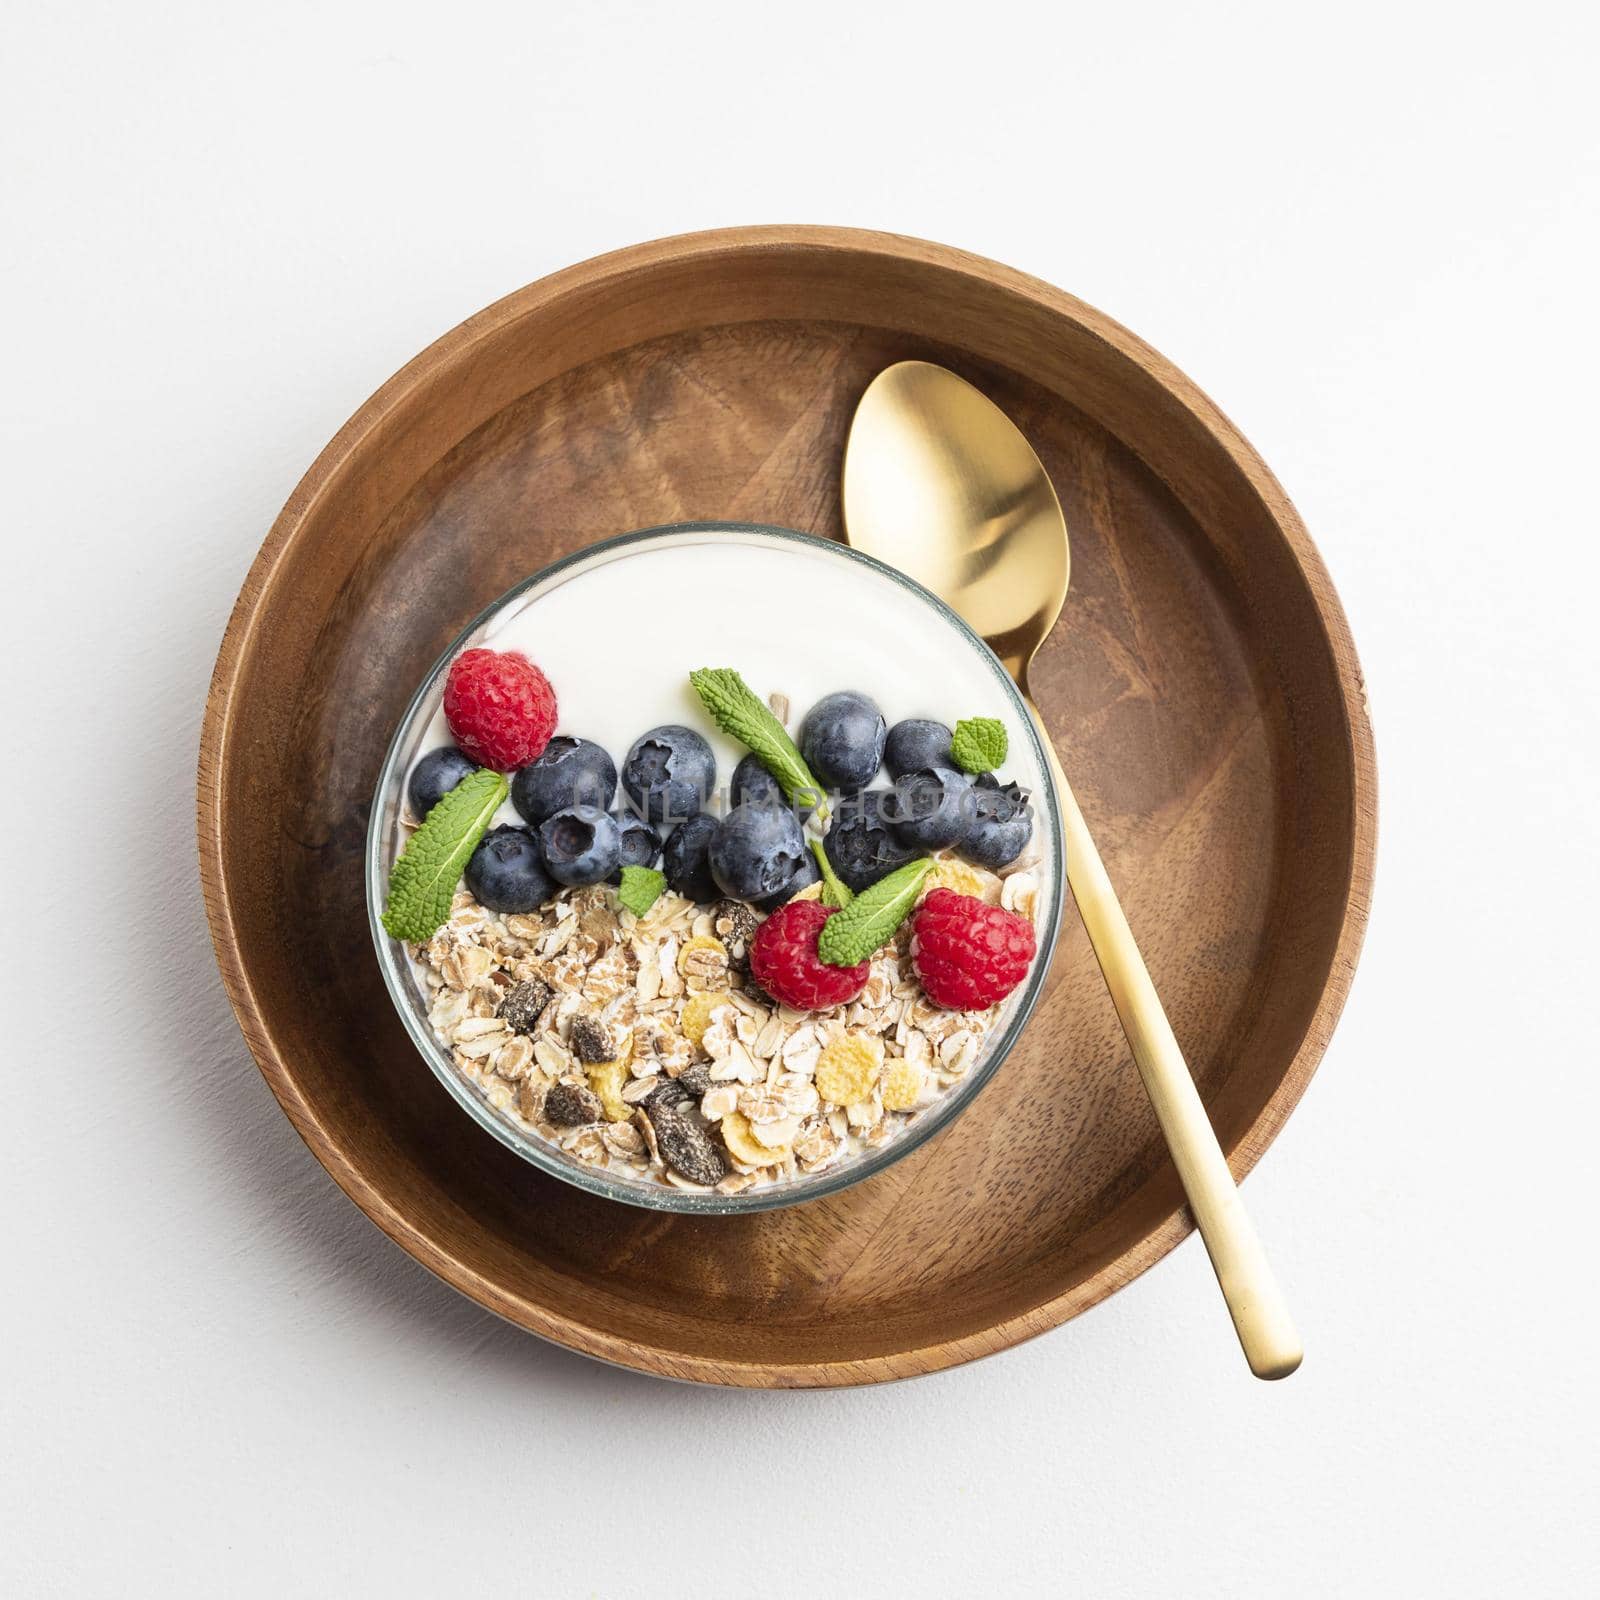 top view oatmeal bowl with raspberries blueberries2. High quality beautiful photo concept by Zahard